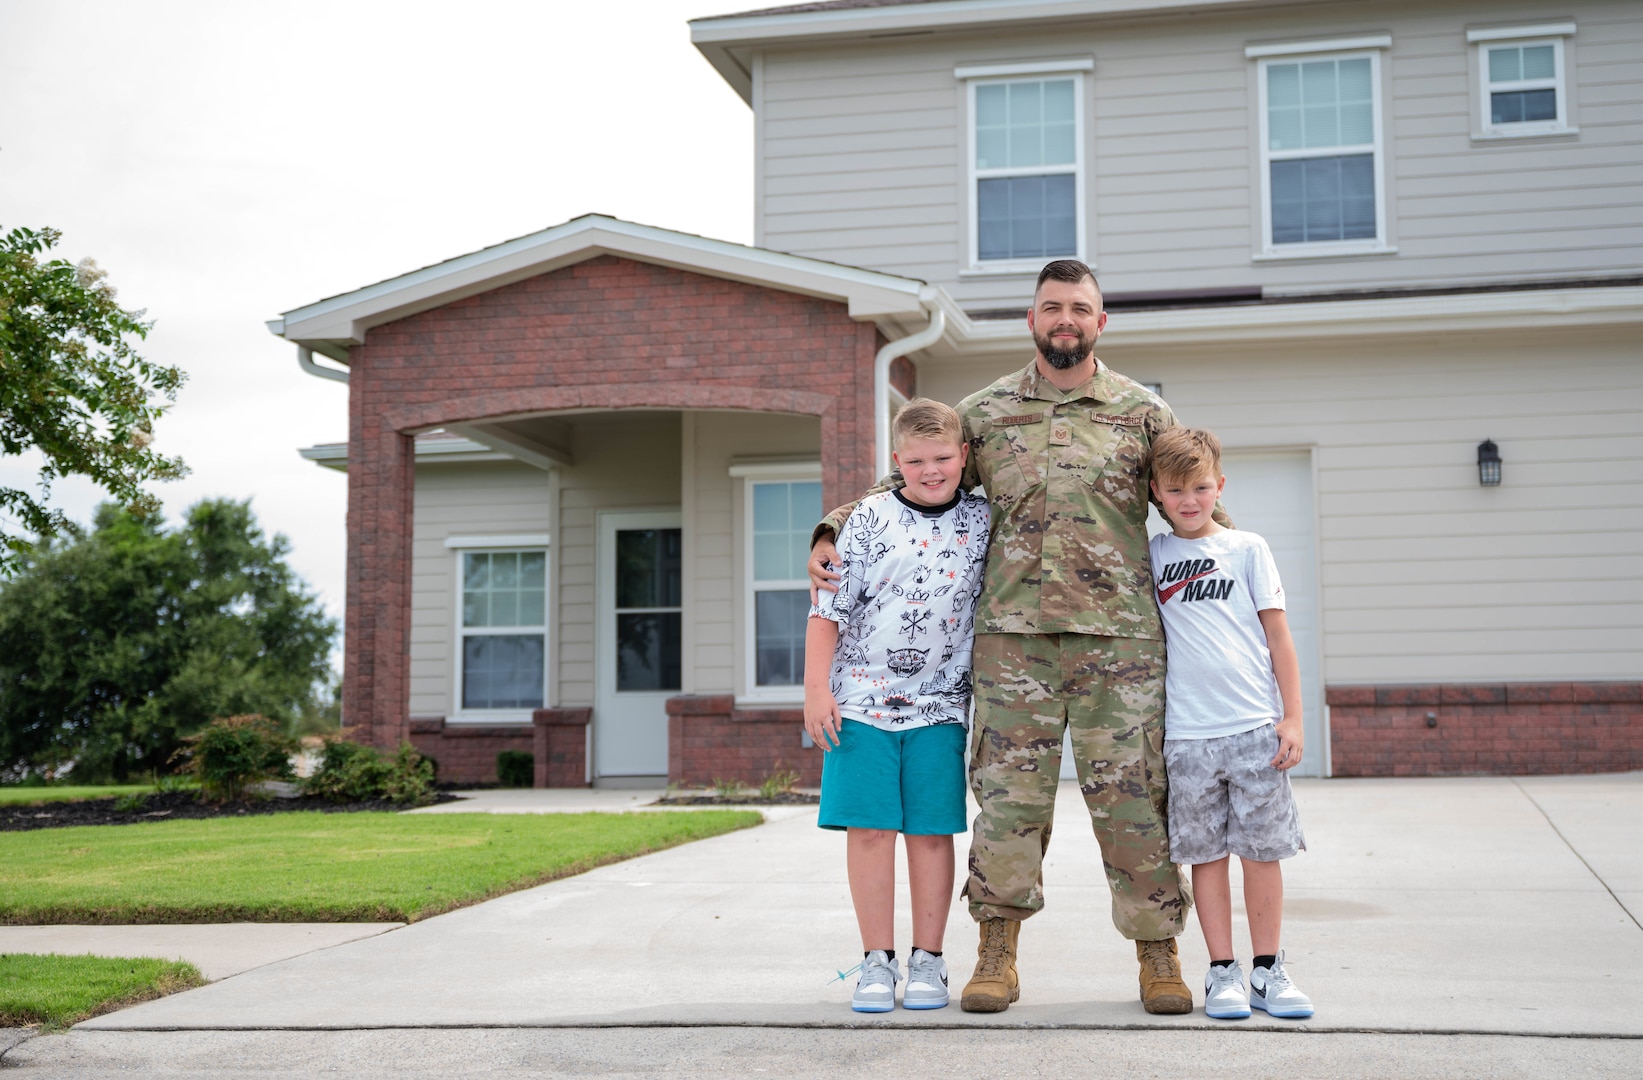 A serviceman and two young boys stand in front of a house